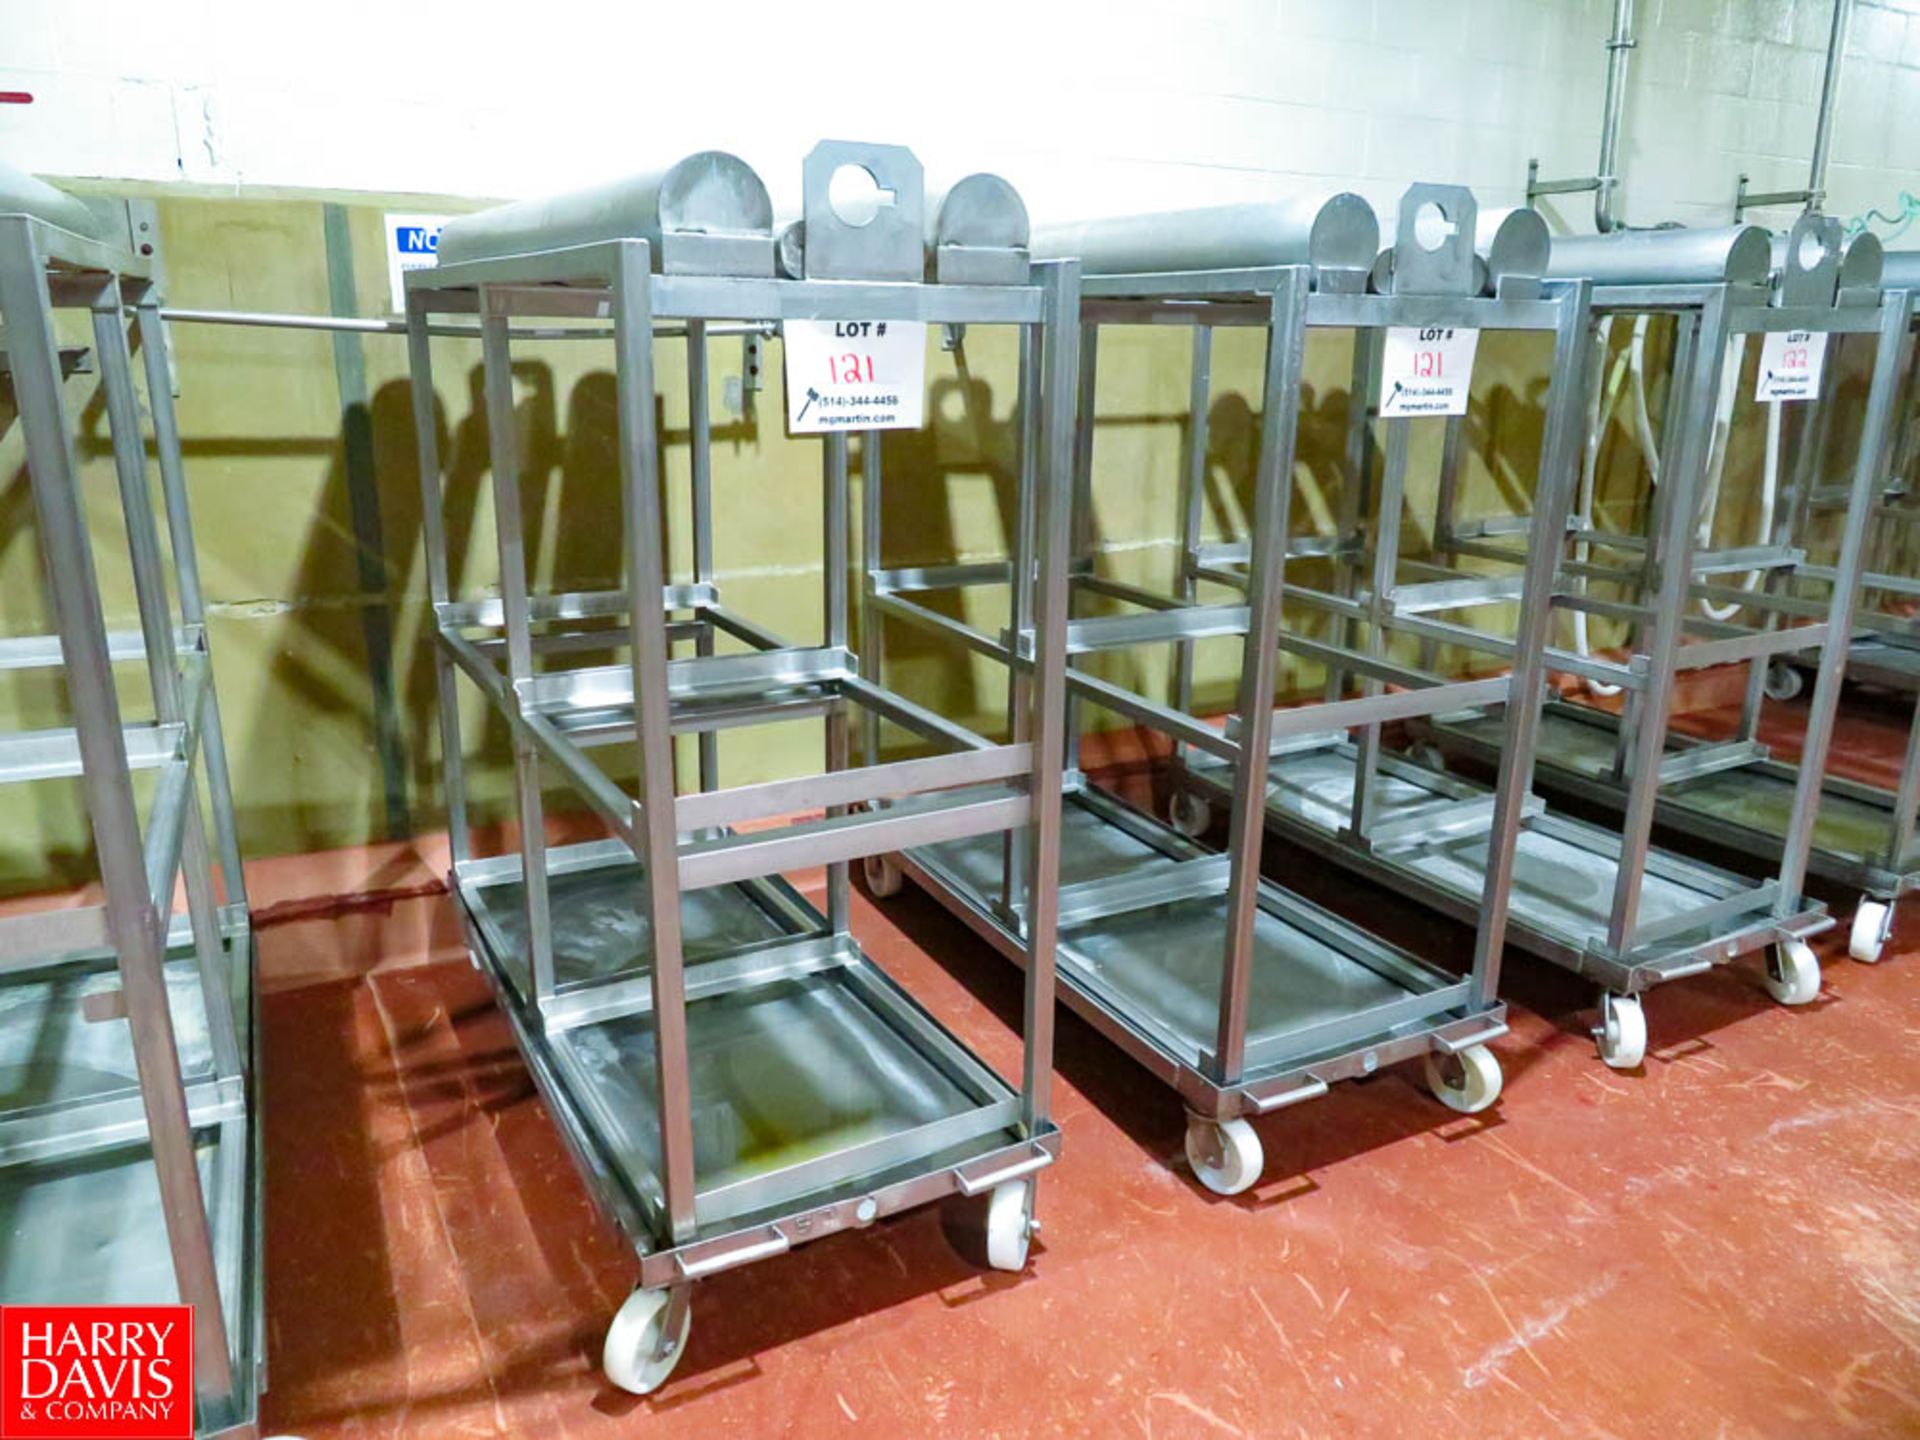 Stainless Racks 63"L x 57"h Frame With Dollie Cart Below (Dollie : 65" x 28 1/2" x 9 1/2"h)